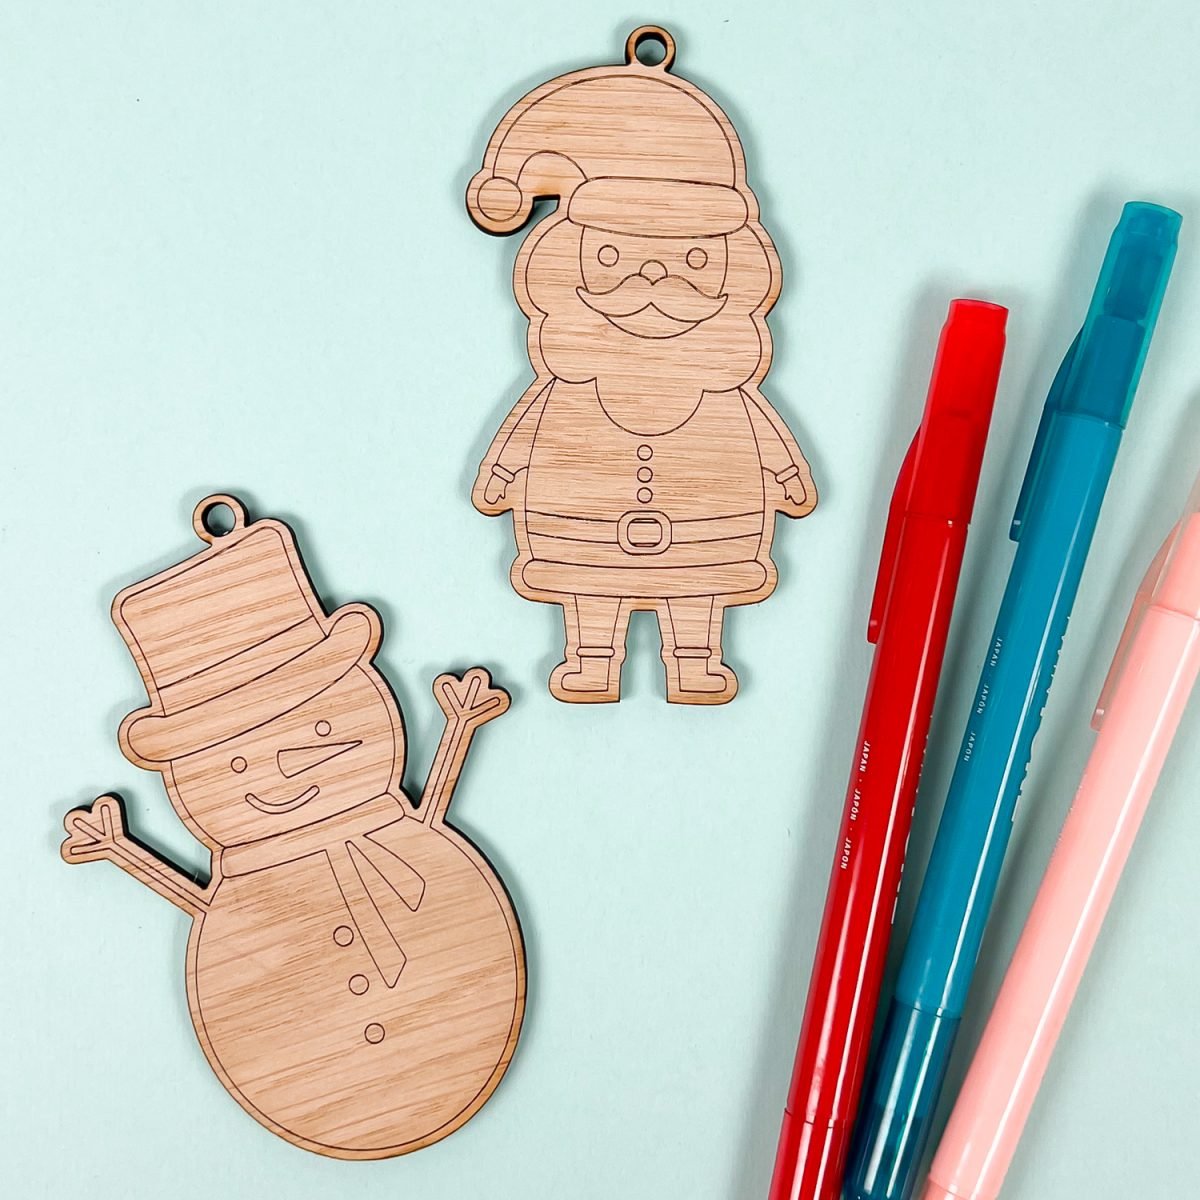 Snowman and santa ornament with colorful pens